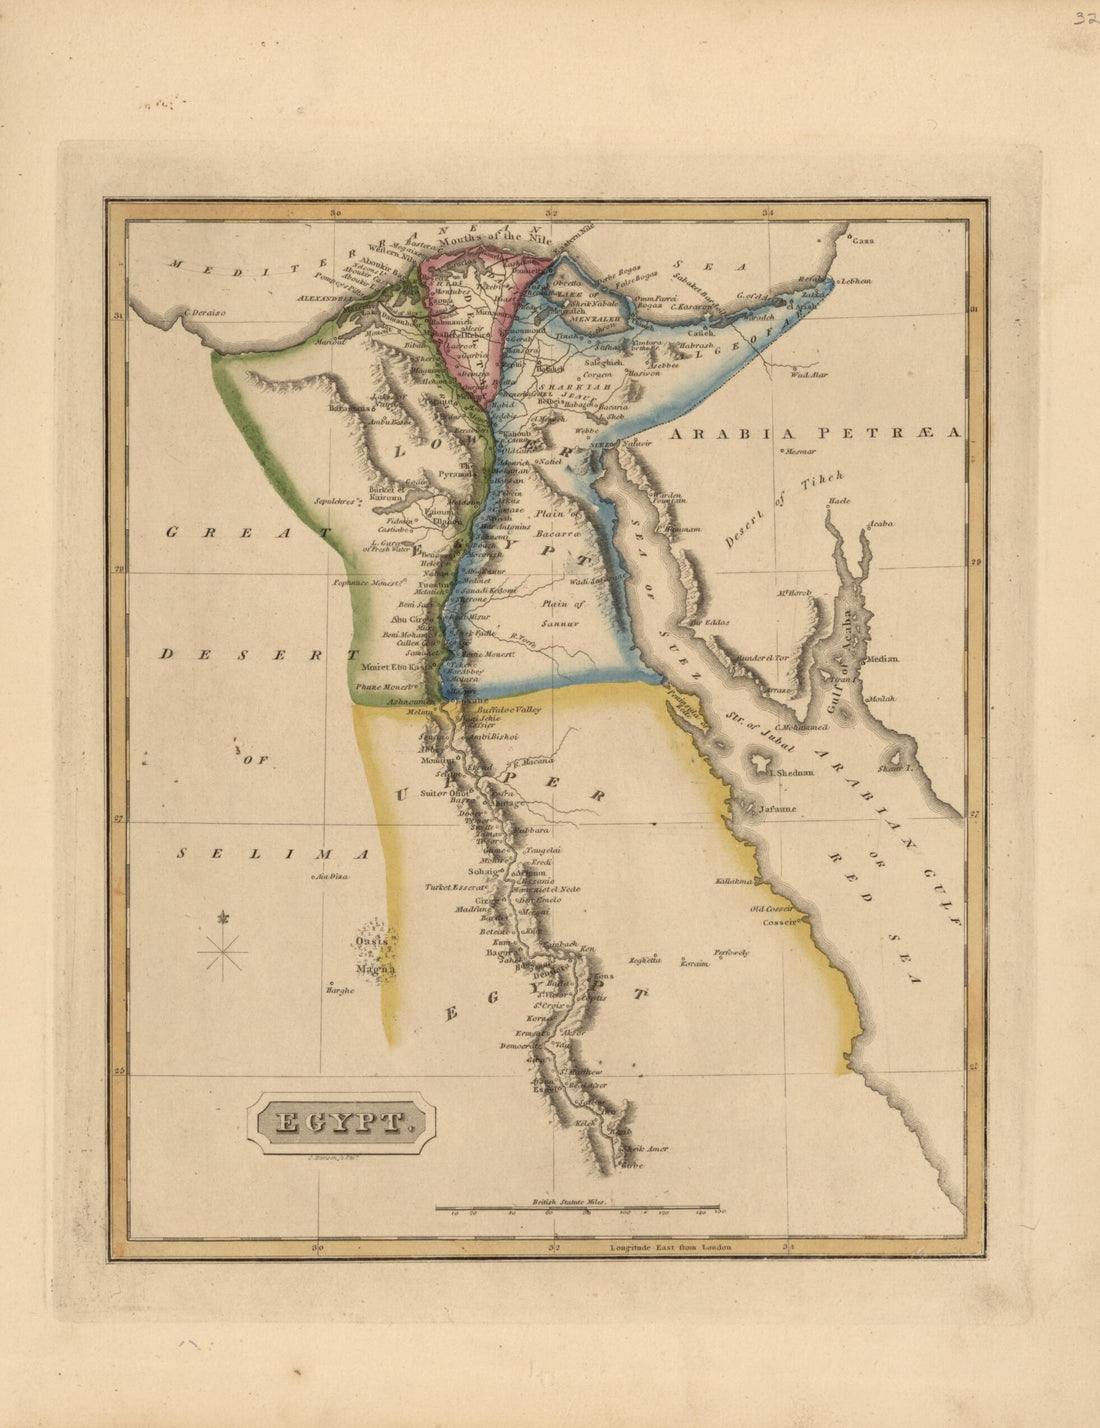 This old map of Egypt from a New and Elegant General Atlas, Containing Maps of Each of the United States. from 1817 was created by Henry Schenck Tanner in 1817